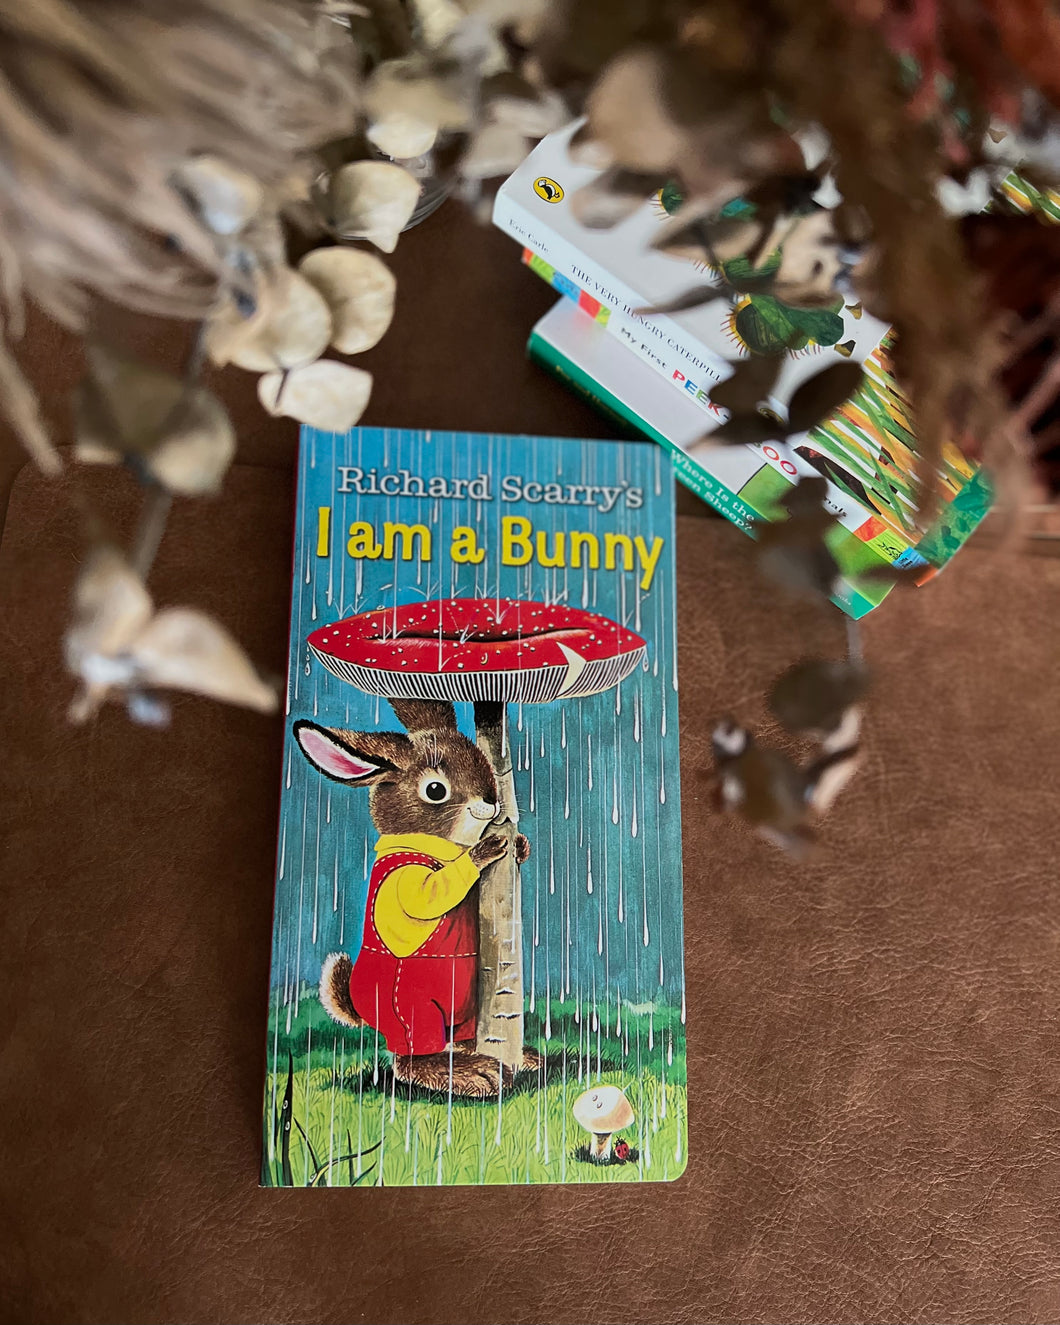 Classic: I am a Bunny by Richard Scarry